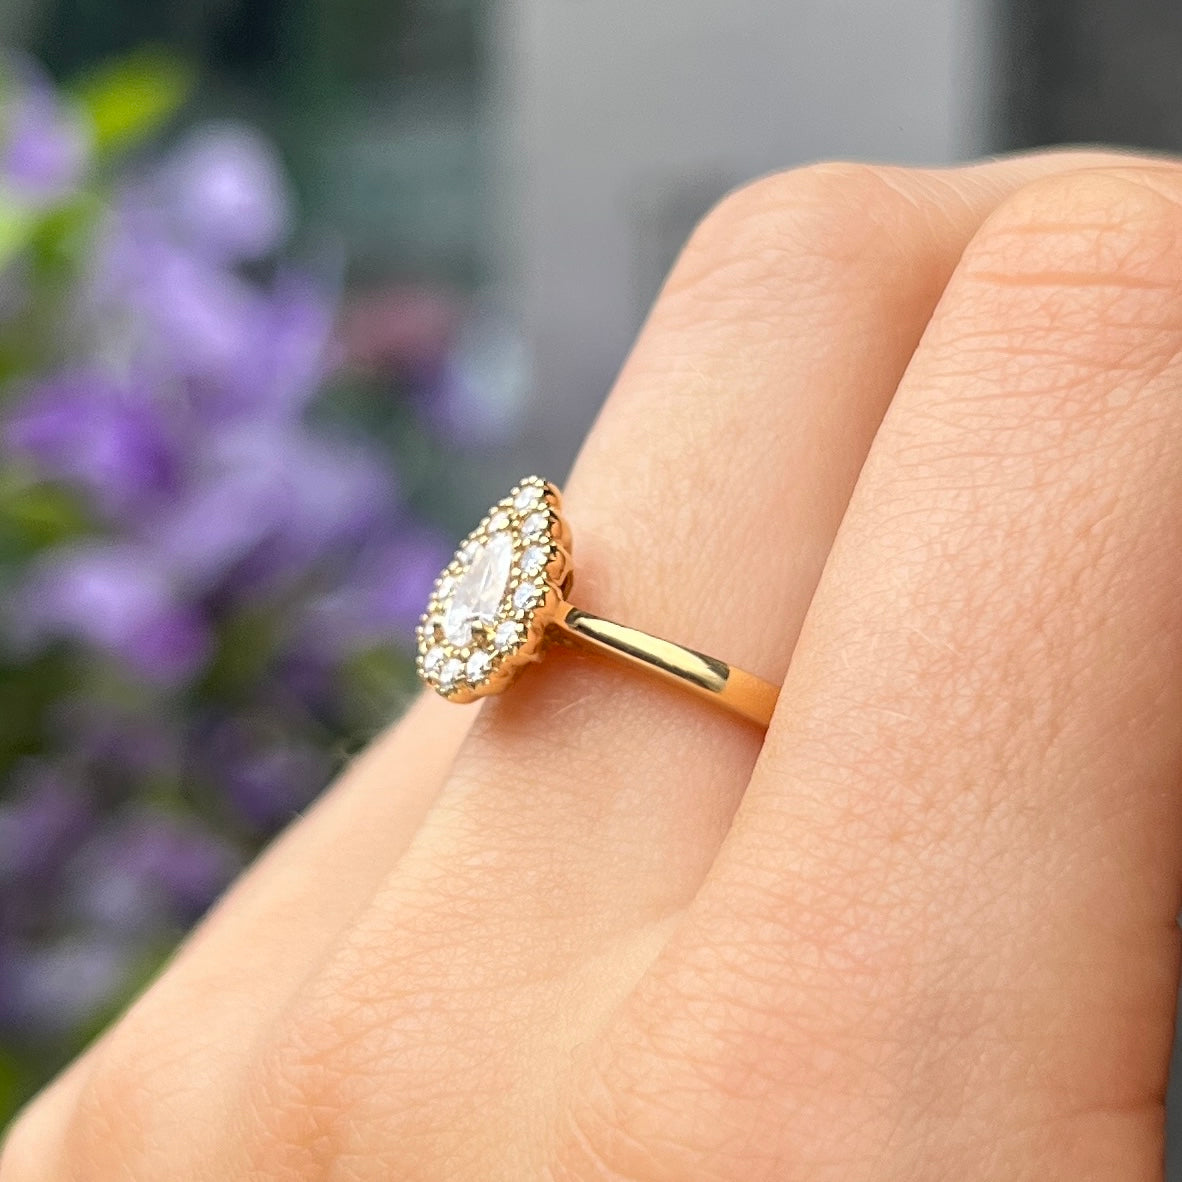 18ct Yellow Gold Pear Shaped Diamond Ring - Size M